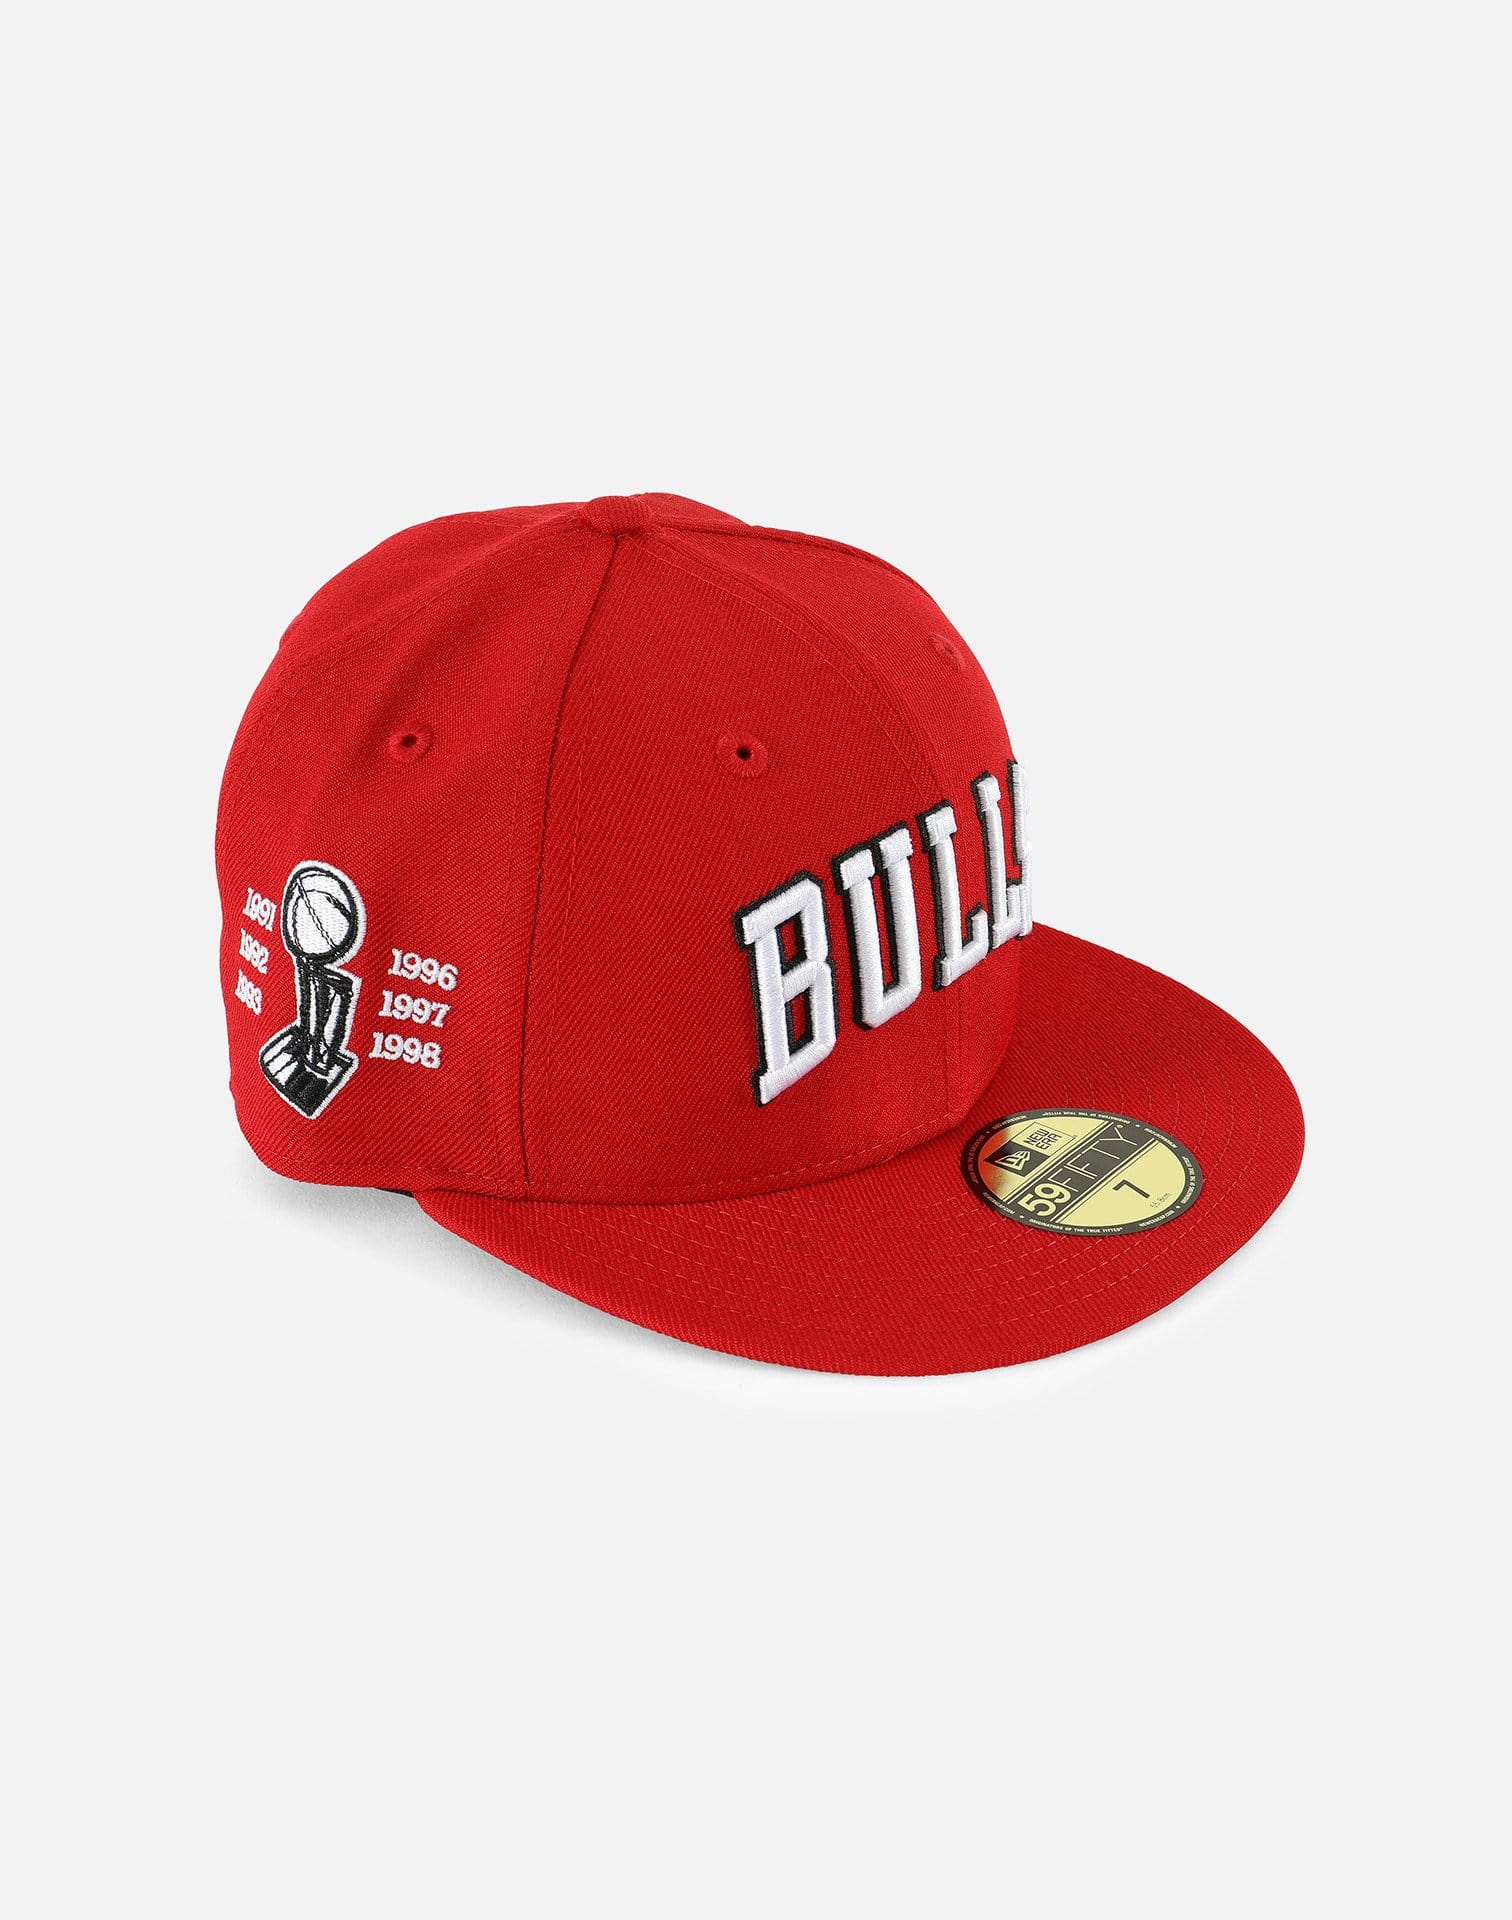 New Era 59FIFTY NBA CHICAGO BULLS FITTED HAT